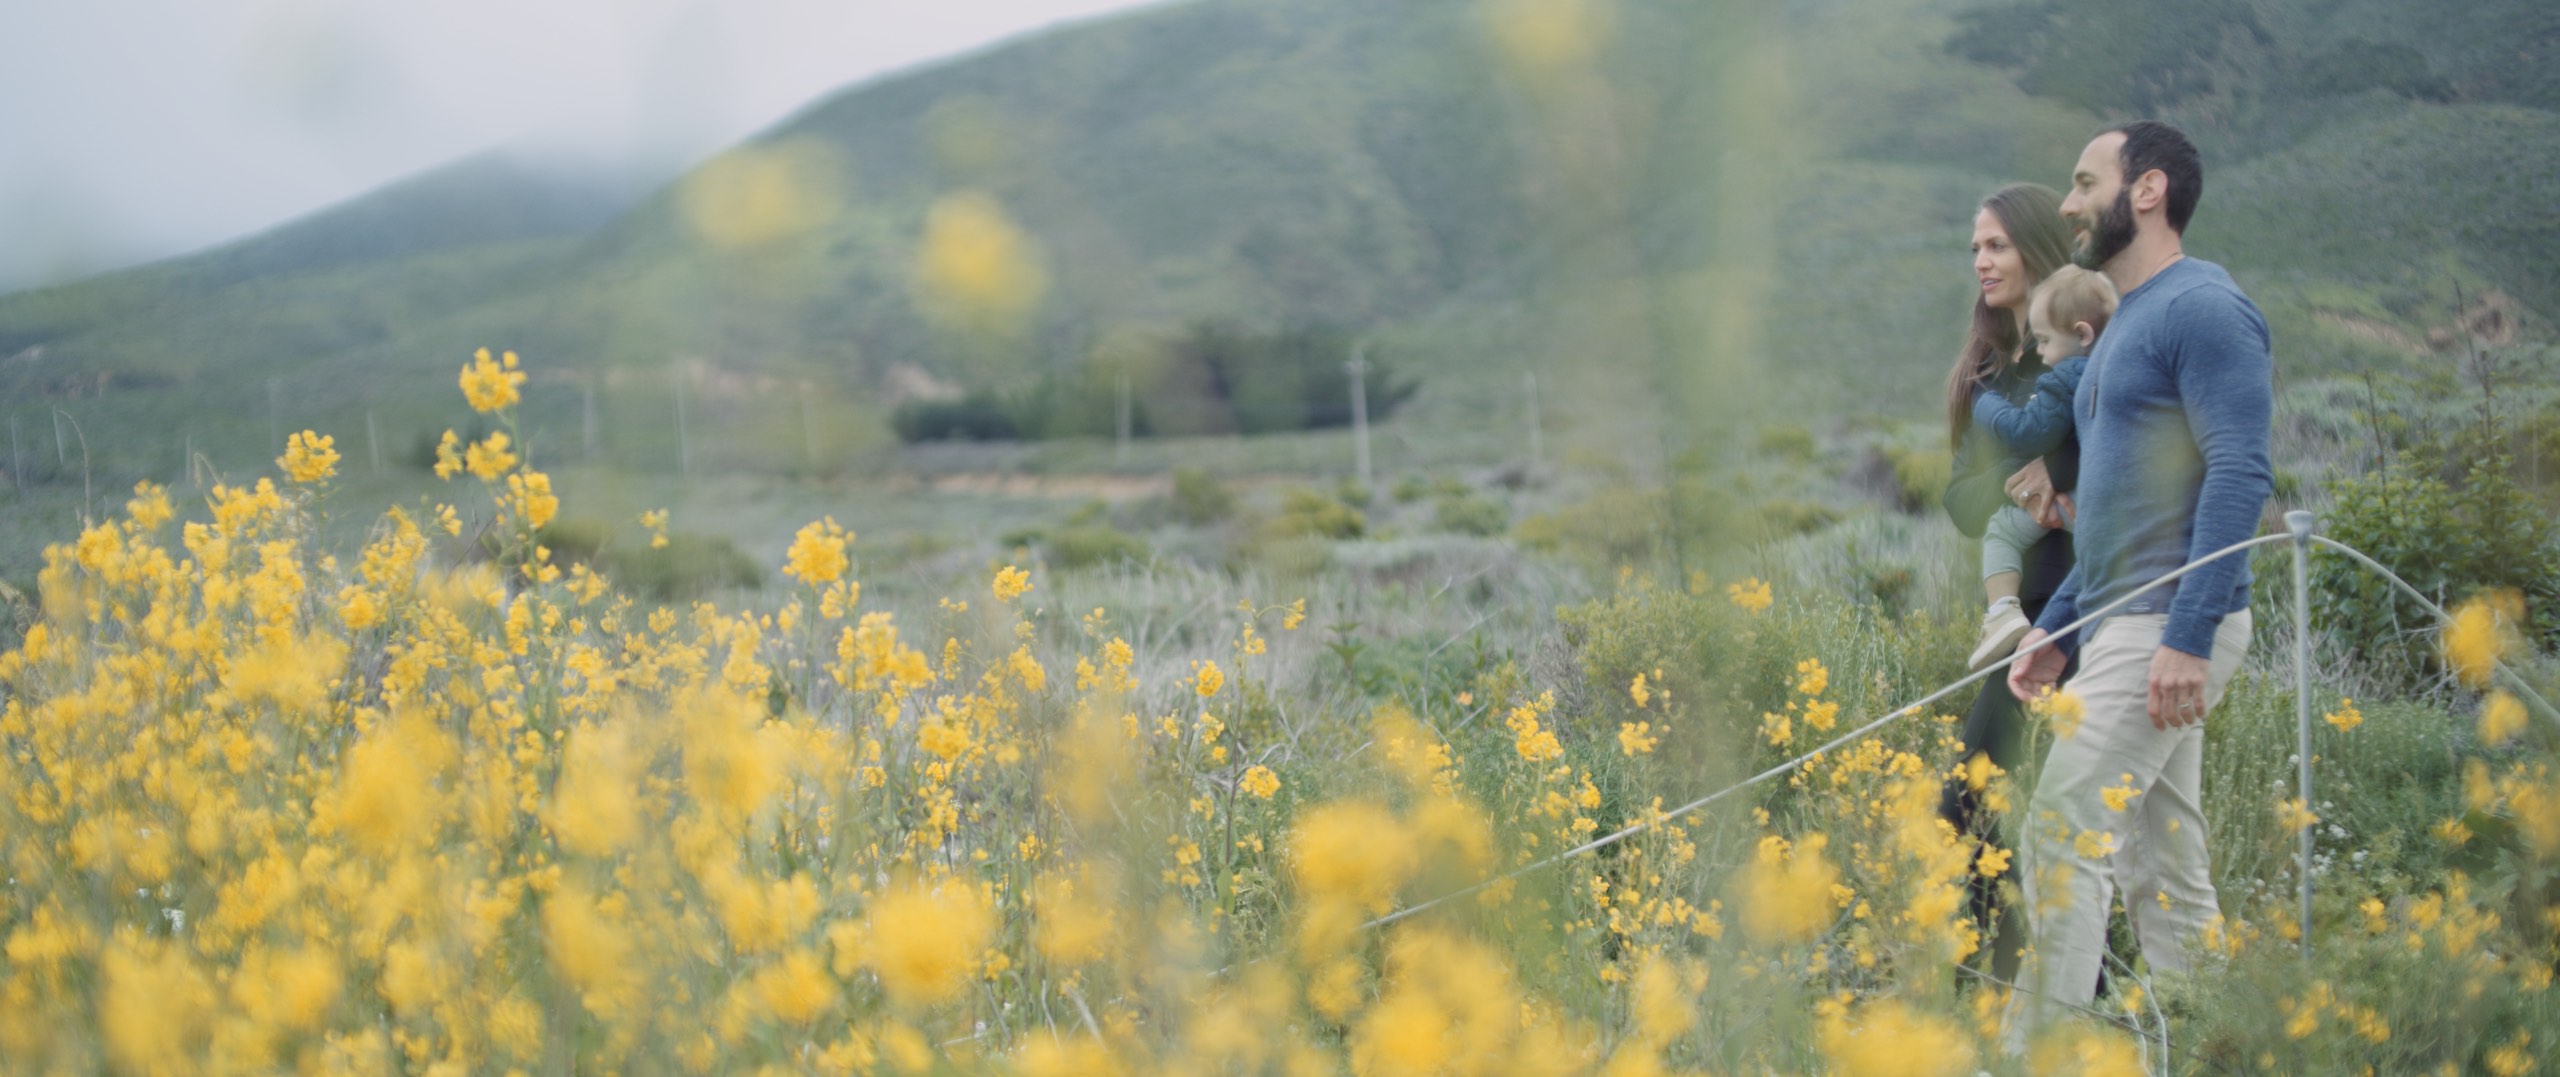 The Dailies Season 2 Episode 3 Komuso Big Sur with side profile of man and woman carrying child walking in the fields with yellow wildflowers